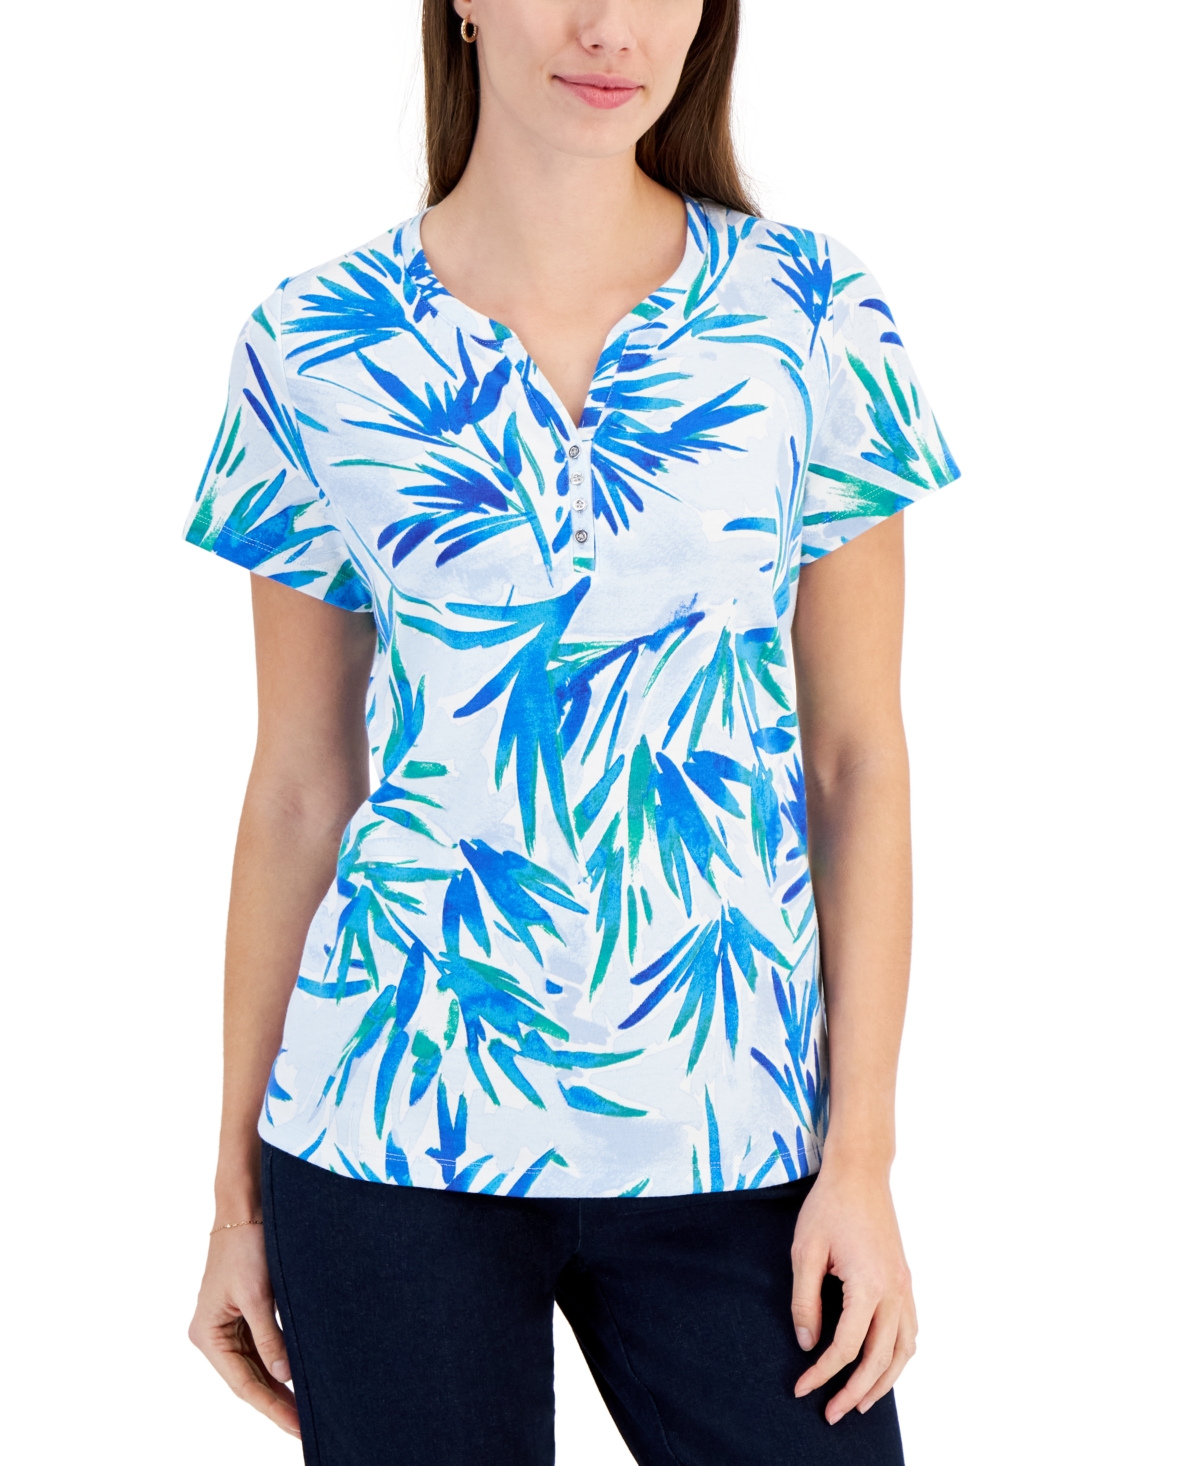 Printed Split-Neck Top, Created for Macy's - Waterfall